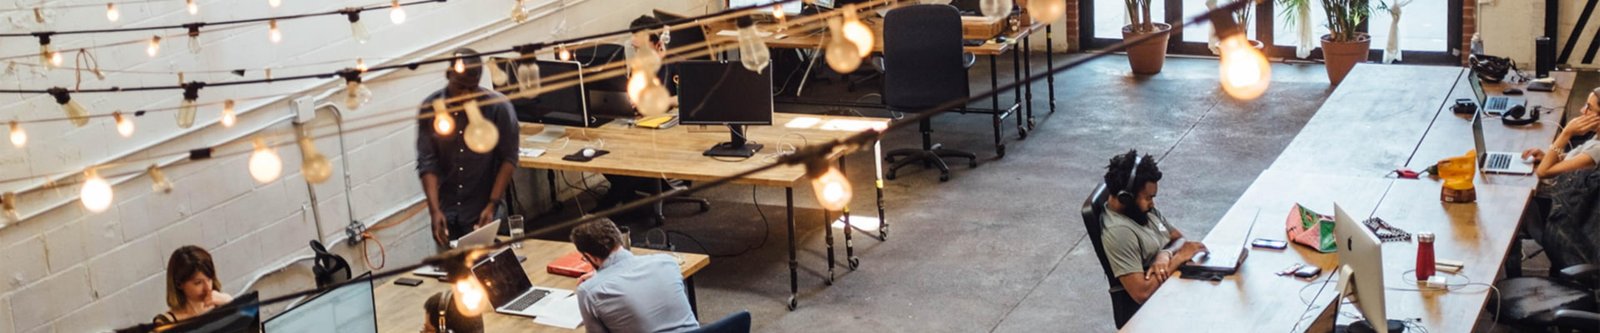 People working in a coworking space with fairy lights stretched above them